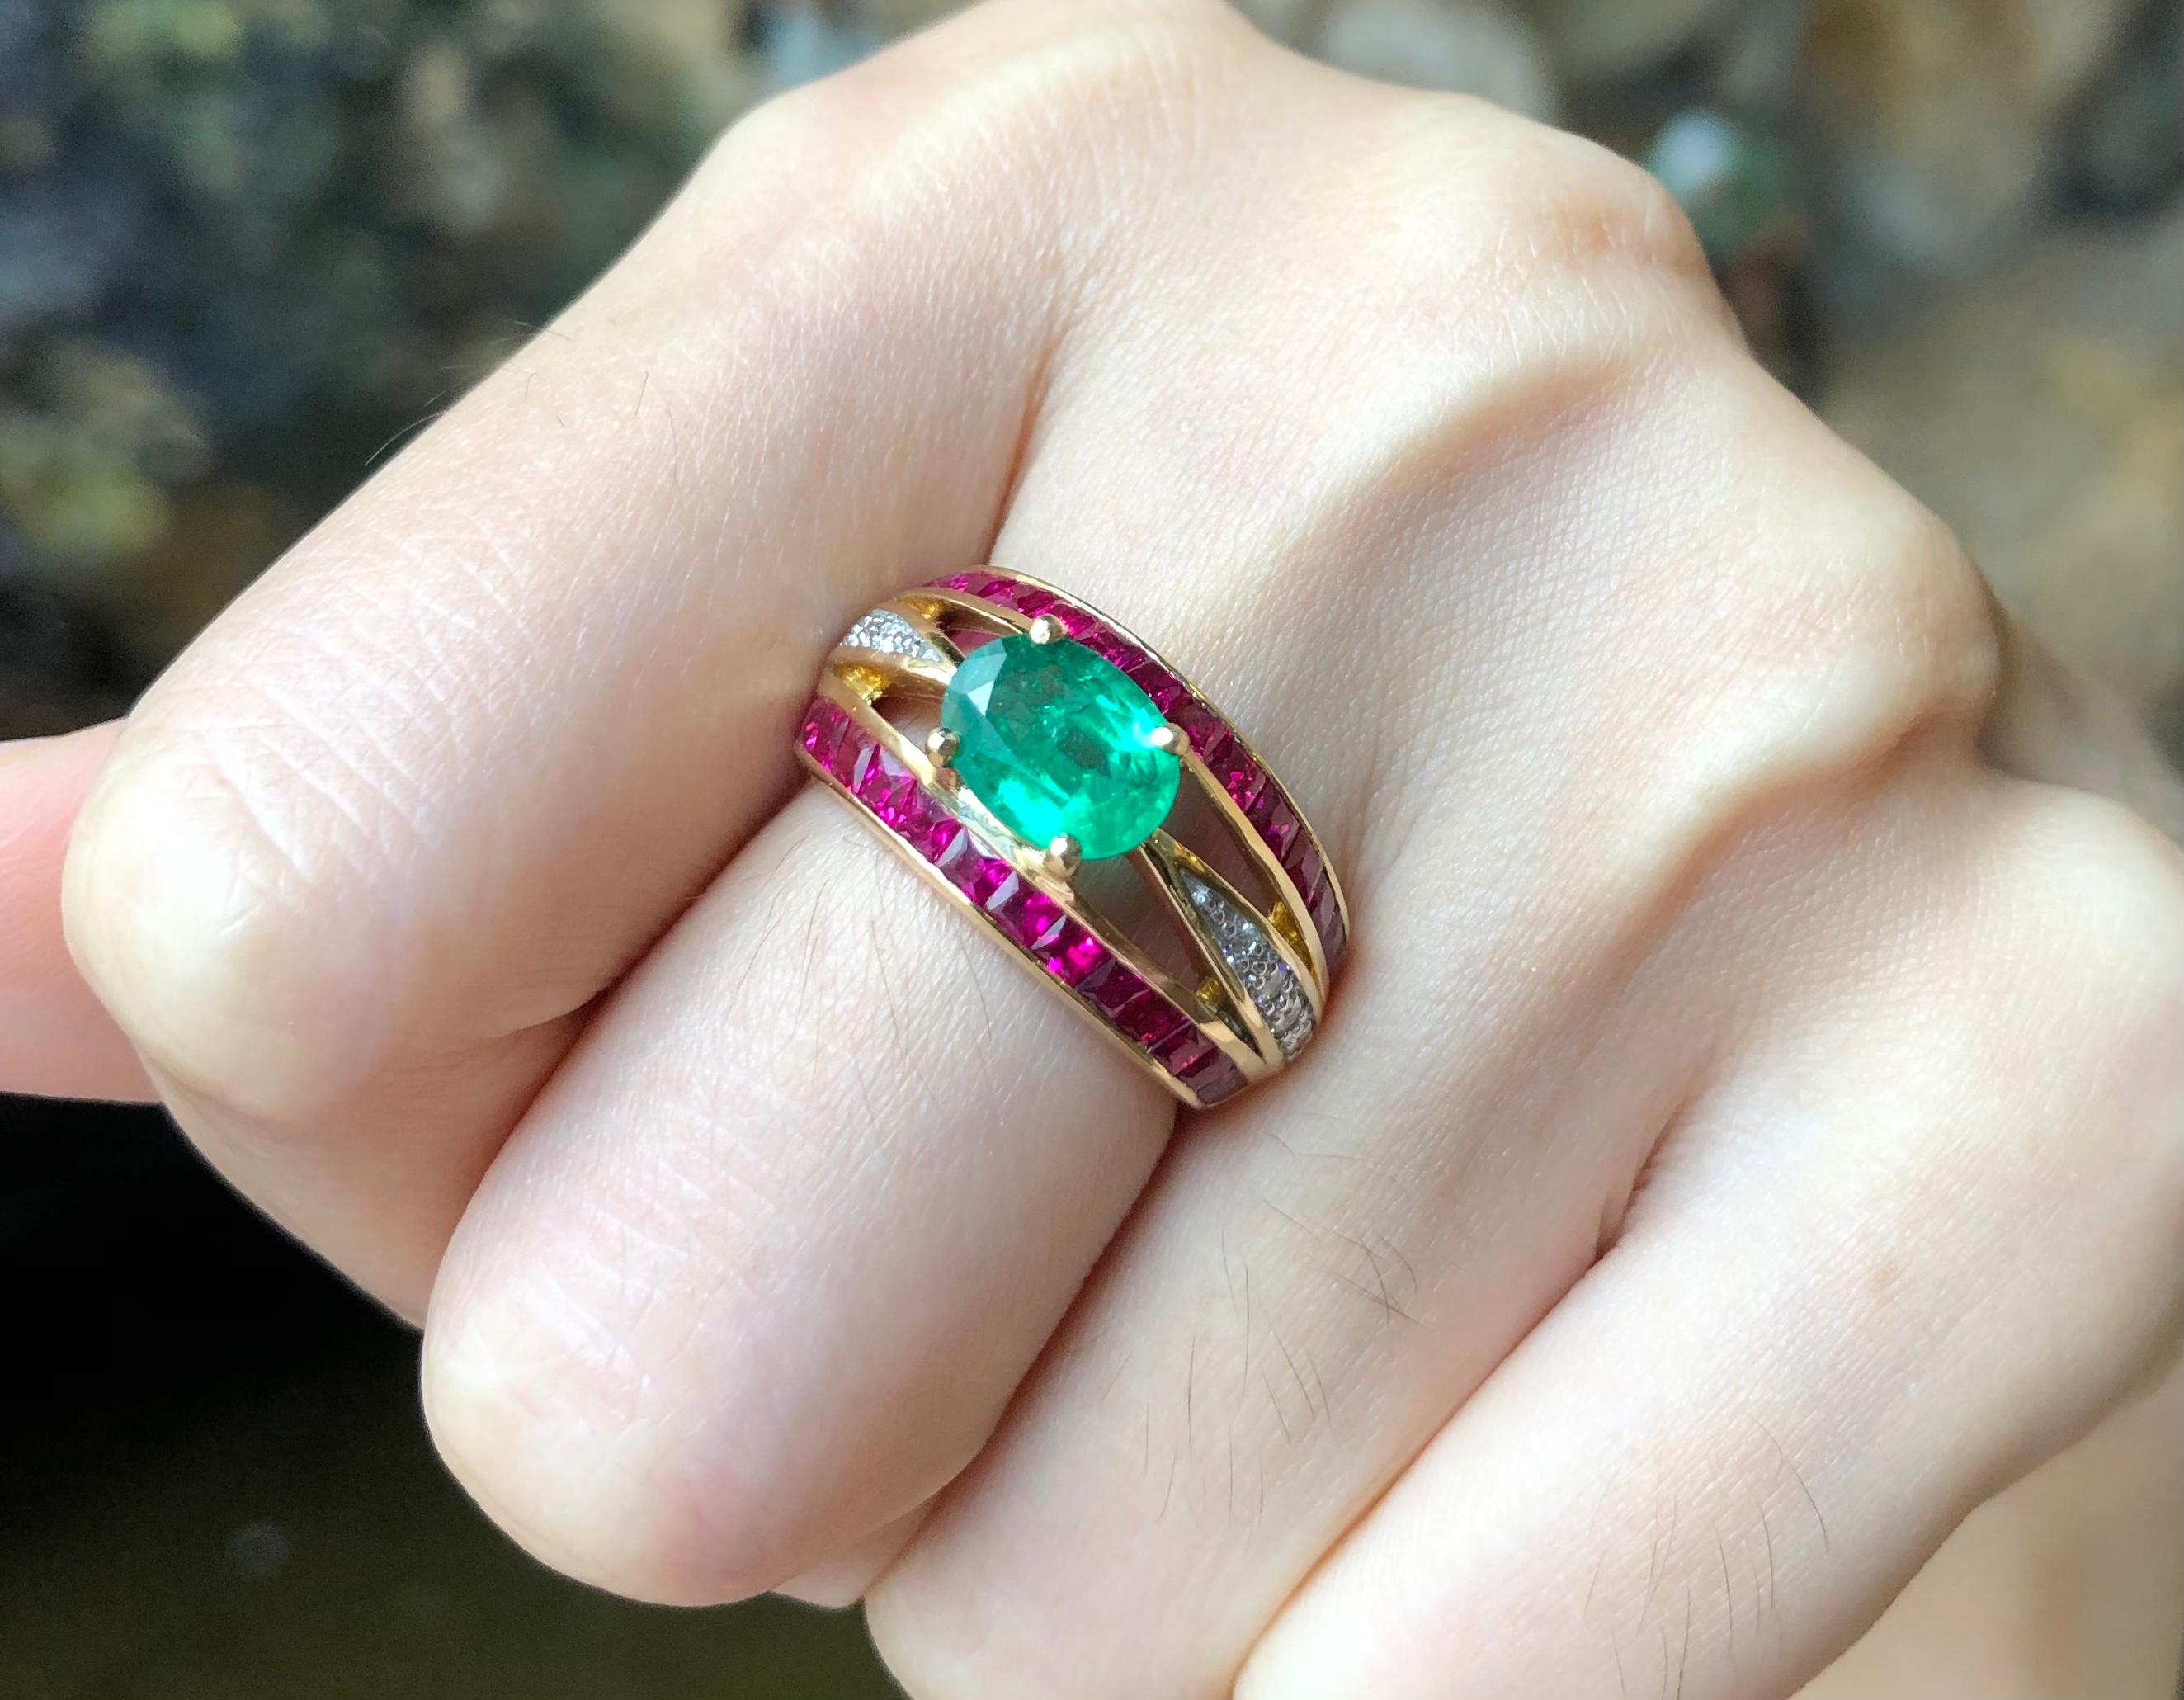 Emerald 1.05 carats with Ruby 1.95 carats and Diamond 0.14 carat Ring set in 18 Karat Gold Settings

Width:  2.0 cm 
Length: 1.1 cm
Ring Size: 52
Total Weight: 9.79 grams

Emerald 
Width:  0.8 cm 
Length: 0.5 cm

